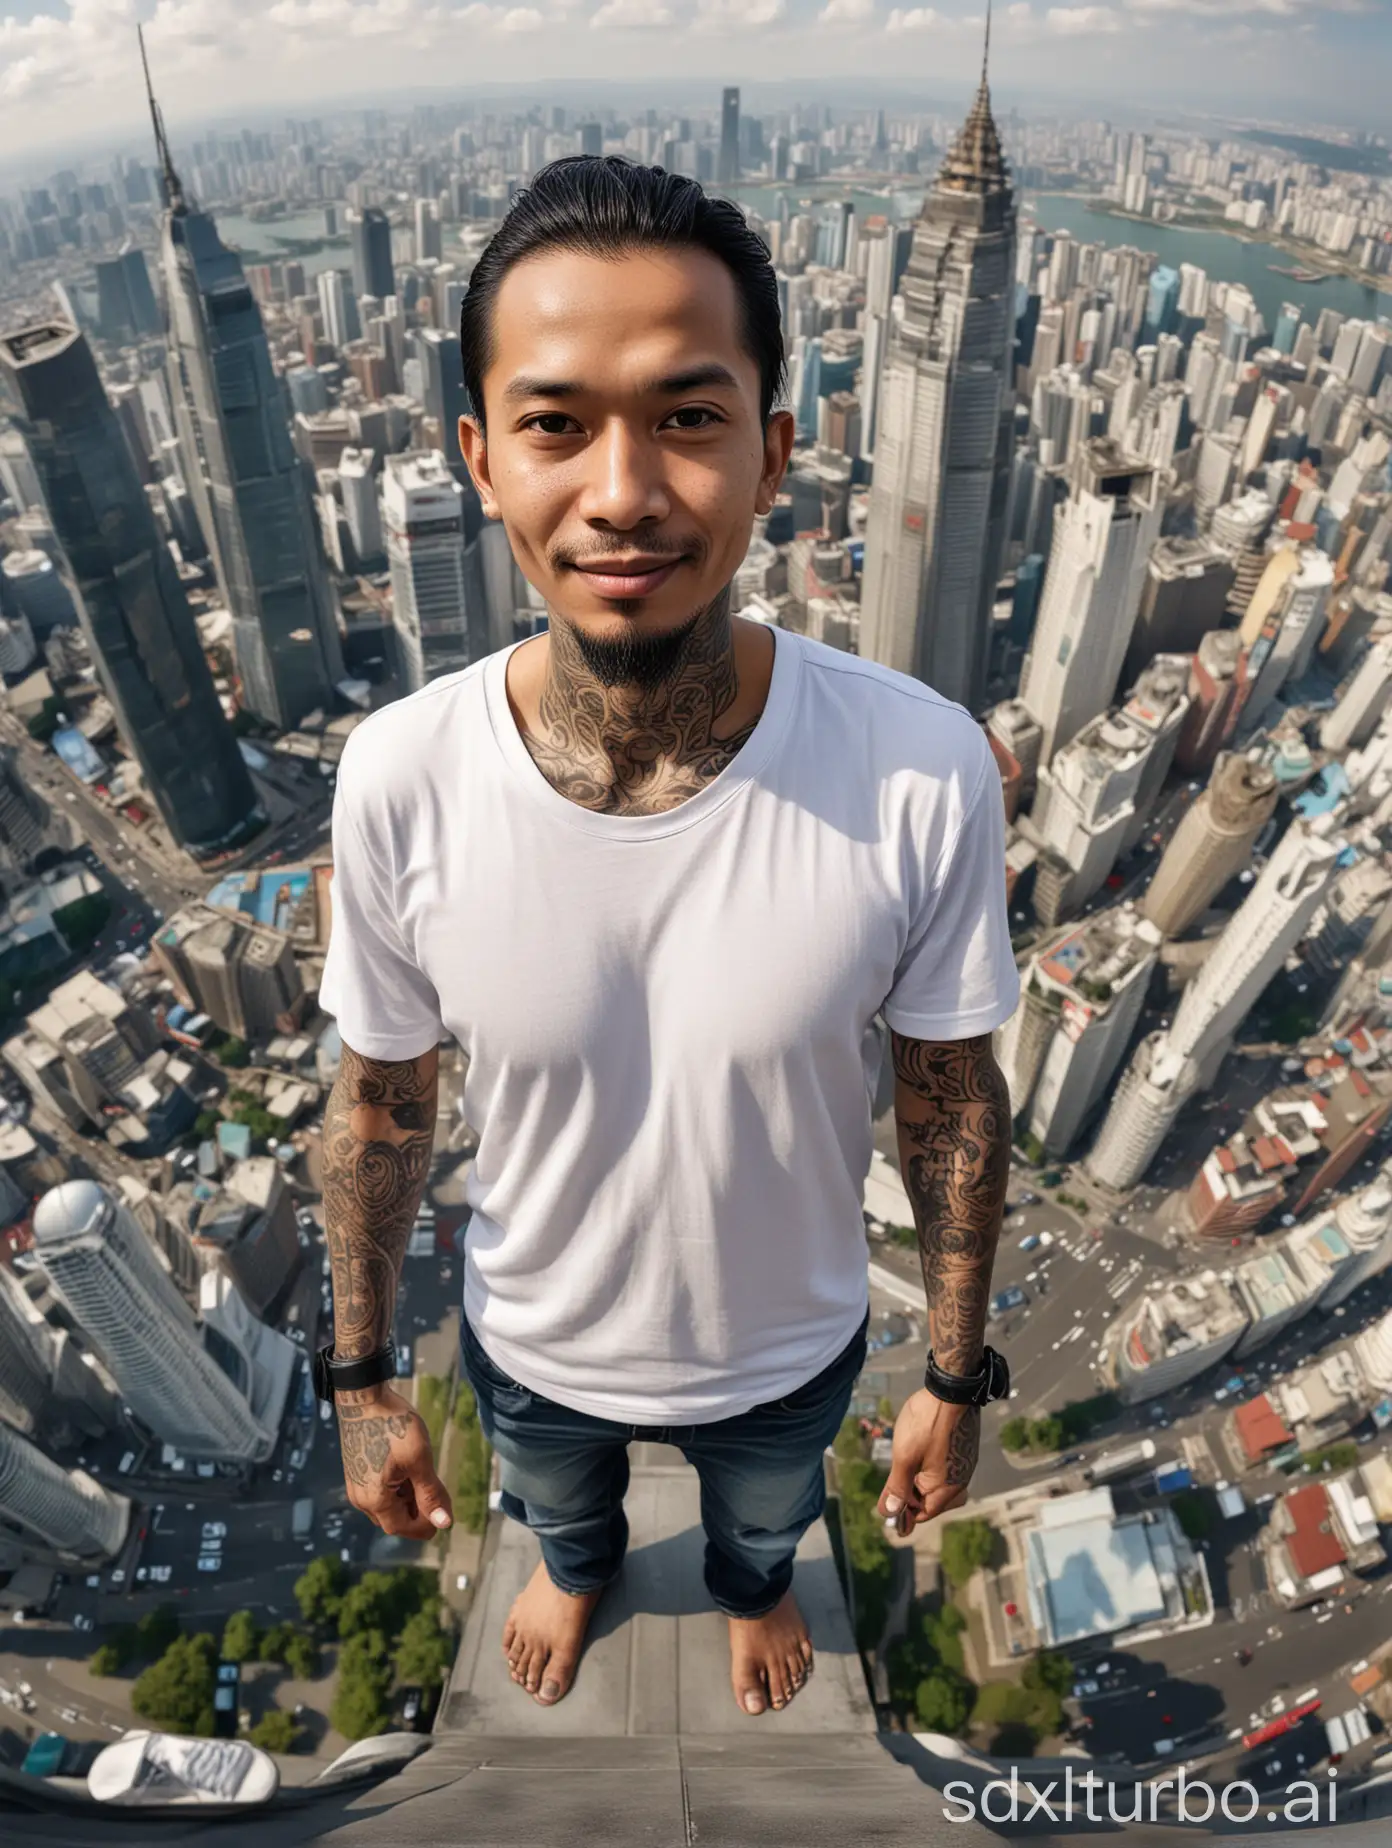 Created a hyperrealistic 4D caricature of a 35 year old Indonesian man, long straight hair tied in a ponytail, clean face, fully tattooed arms up to his neck, wearing a white t-shirt, jeans, flip-flops, standing at the top of the tallest building while holding the cameraman's hand. Beautiful city background, shot from above, fisheye lens